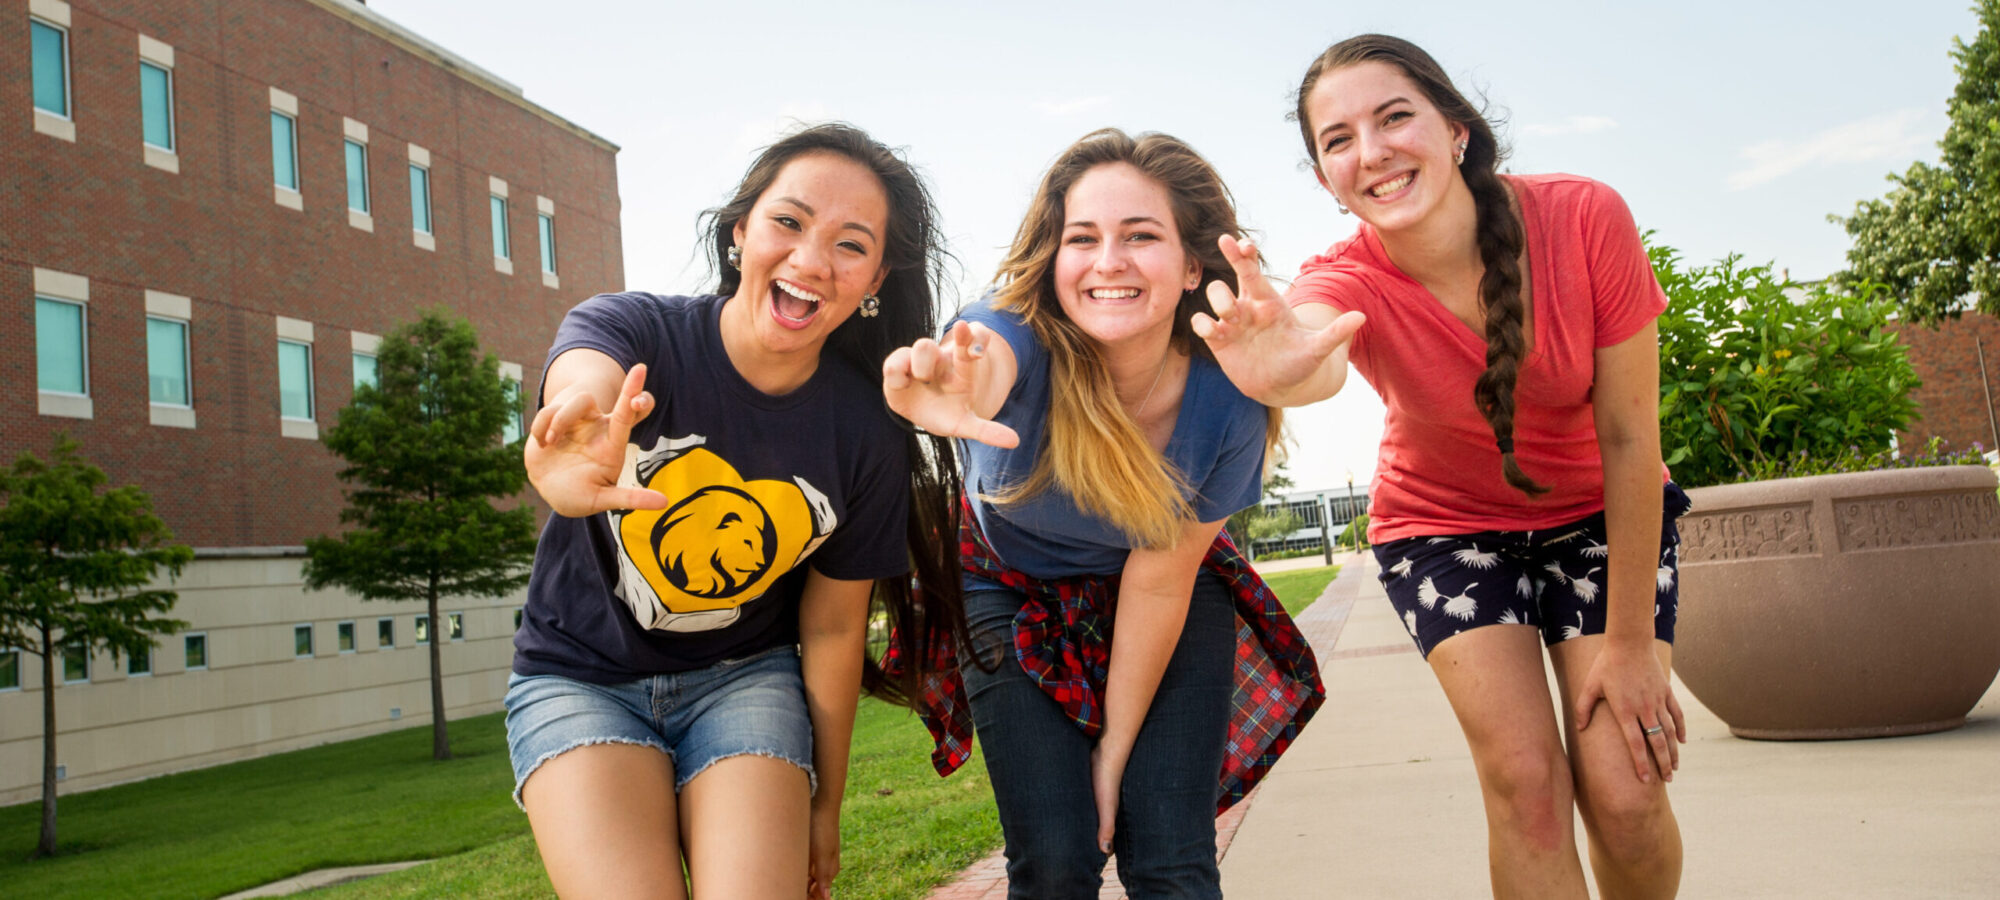 Three female students smiling at the camera making the lions hand sign.